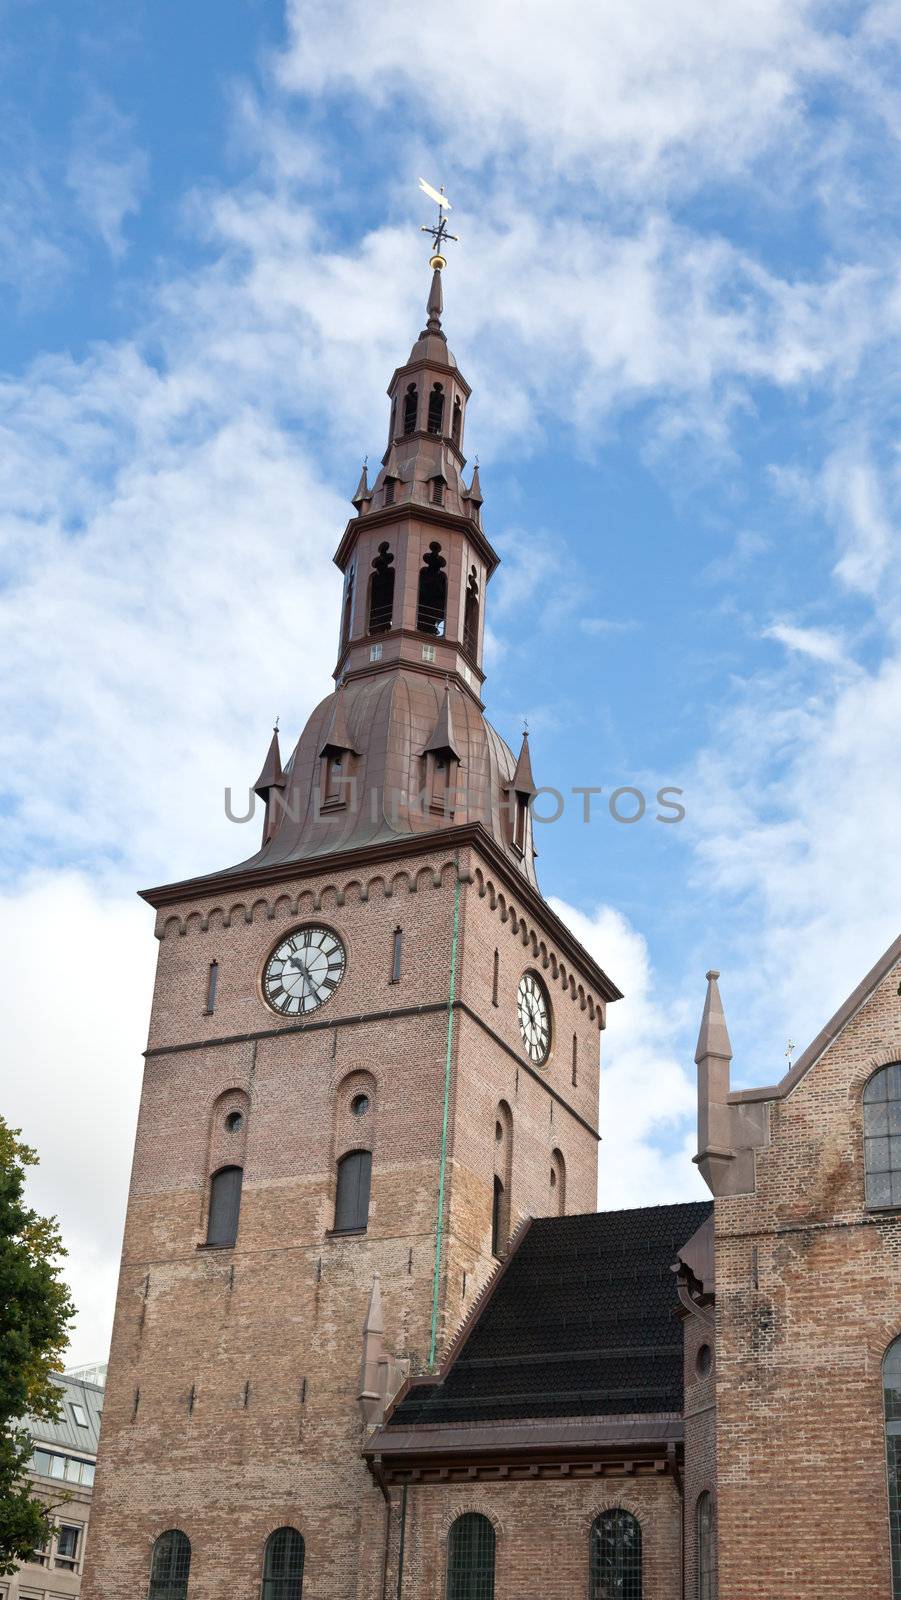 The Domkirken church in central Oslo by gary718